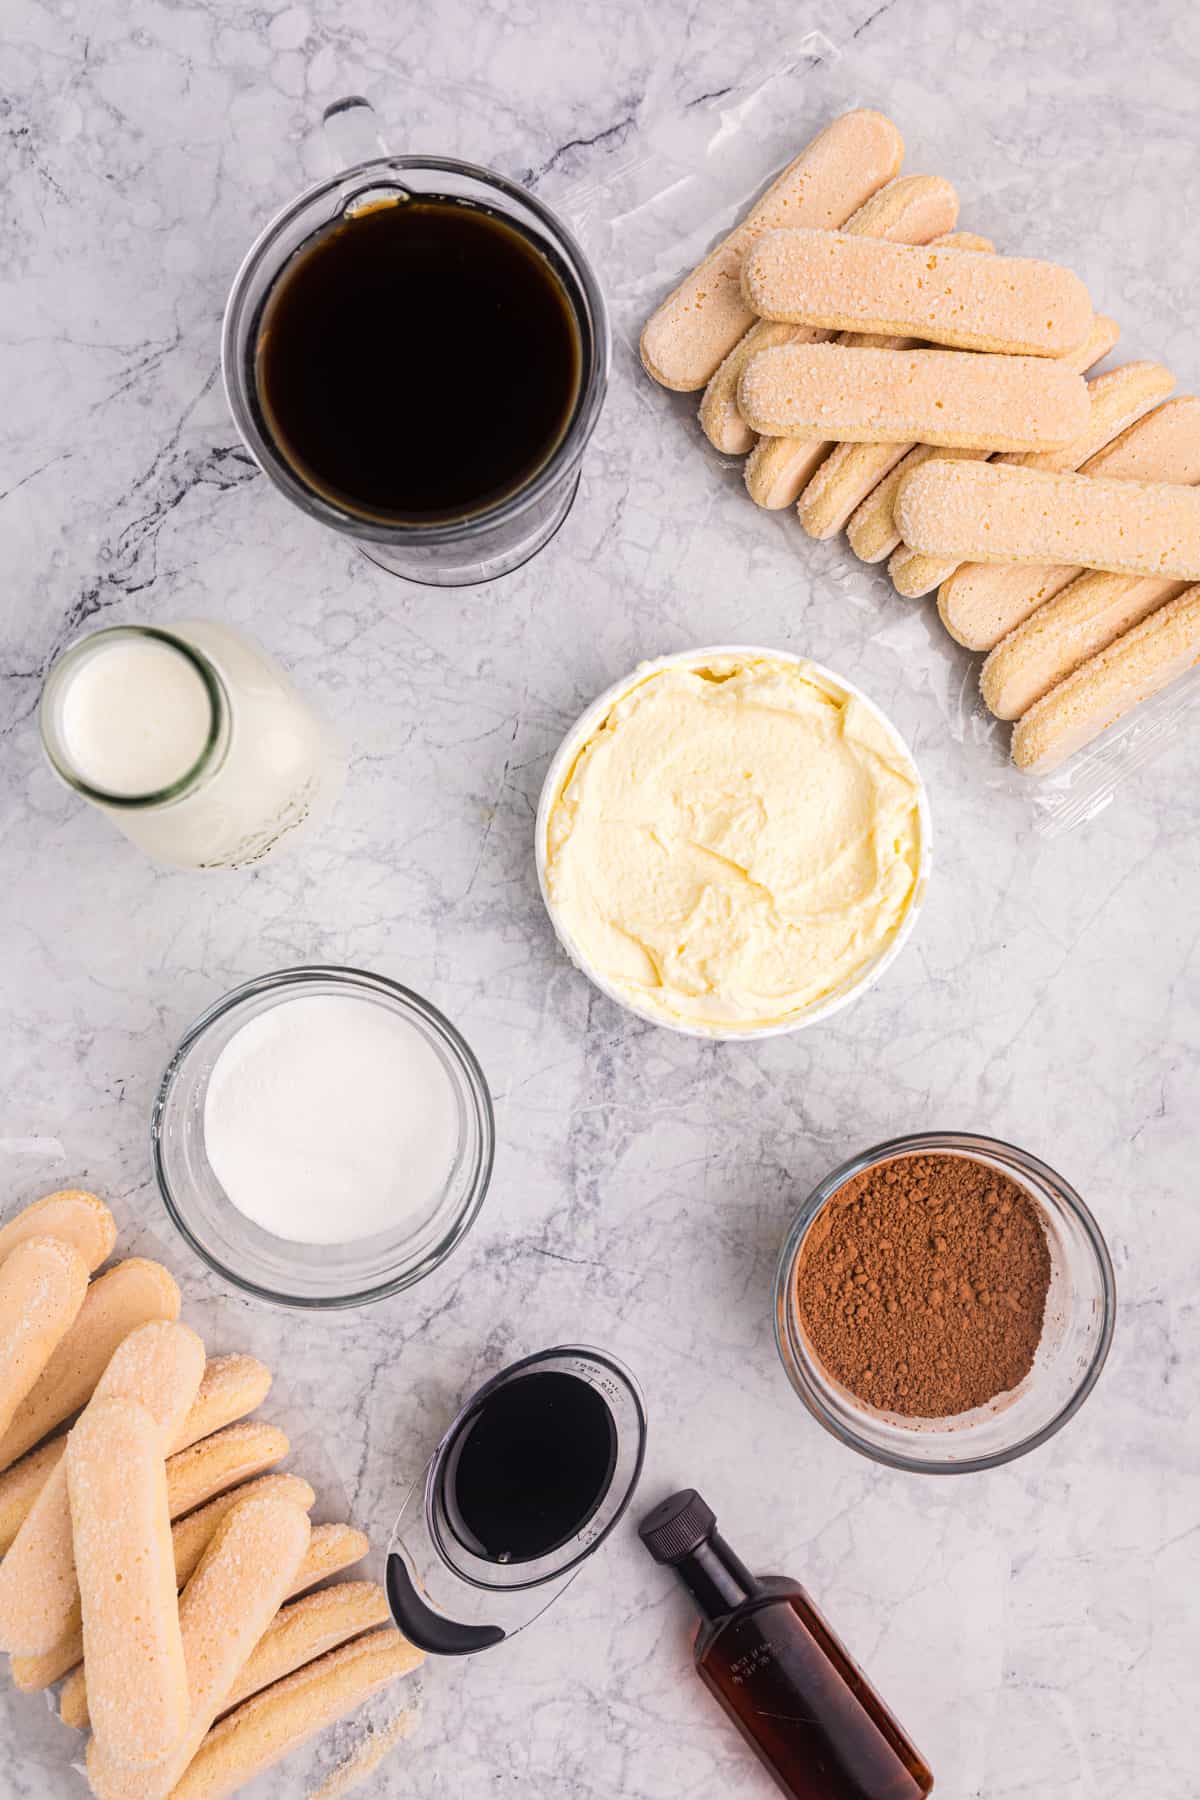 The ingredients for tiramisu are spread out on a marble countertop. 